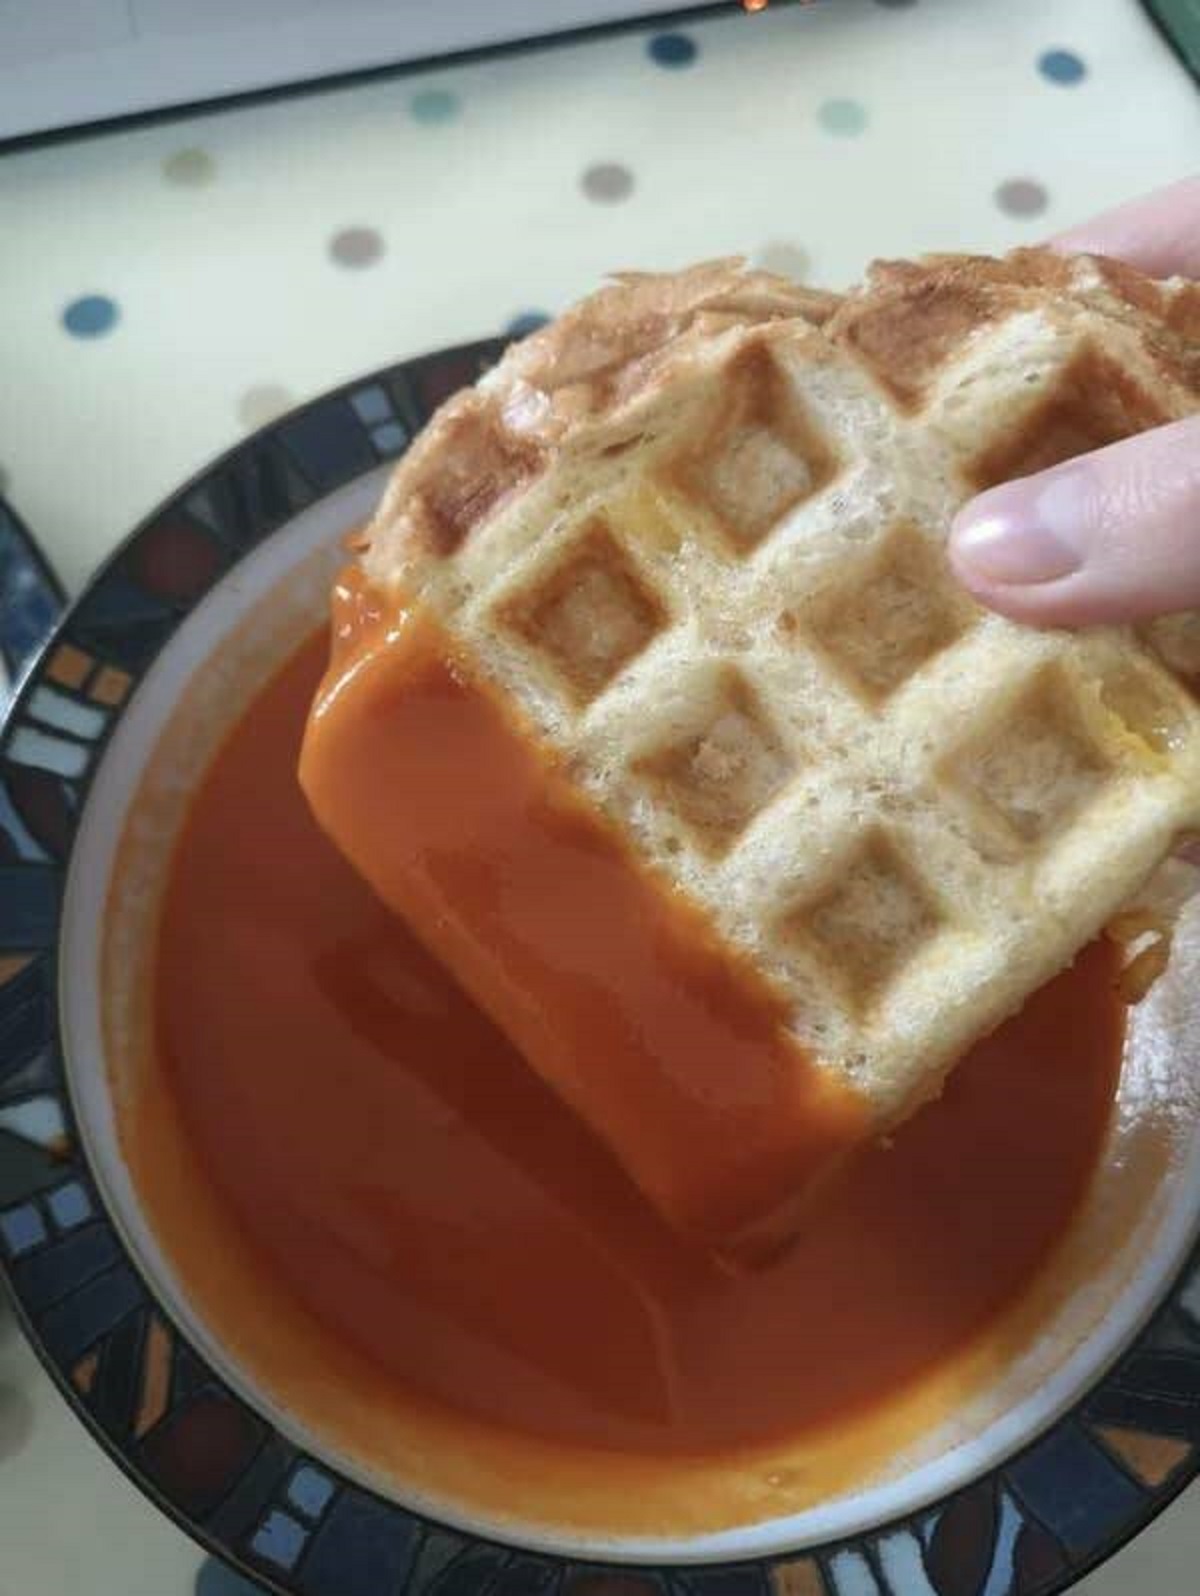 "Cook grilled cheese in a waffle iron. It gets crispy, and the holes hold extra soup."